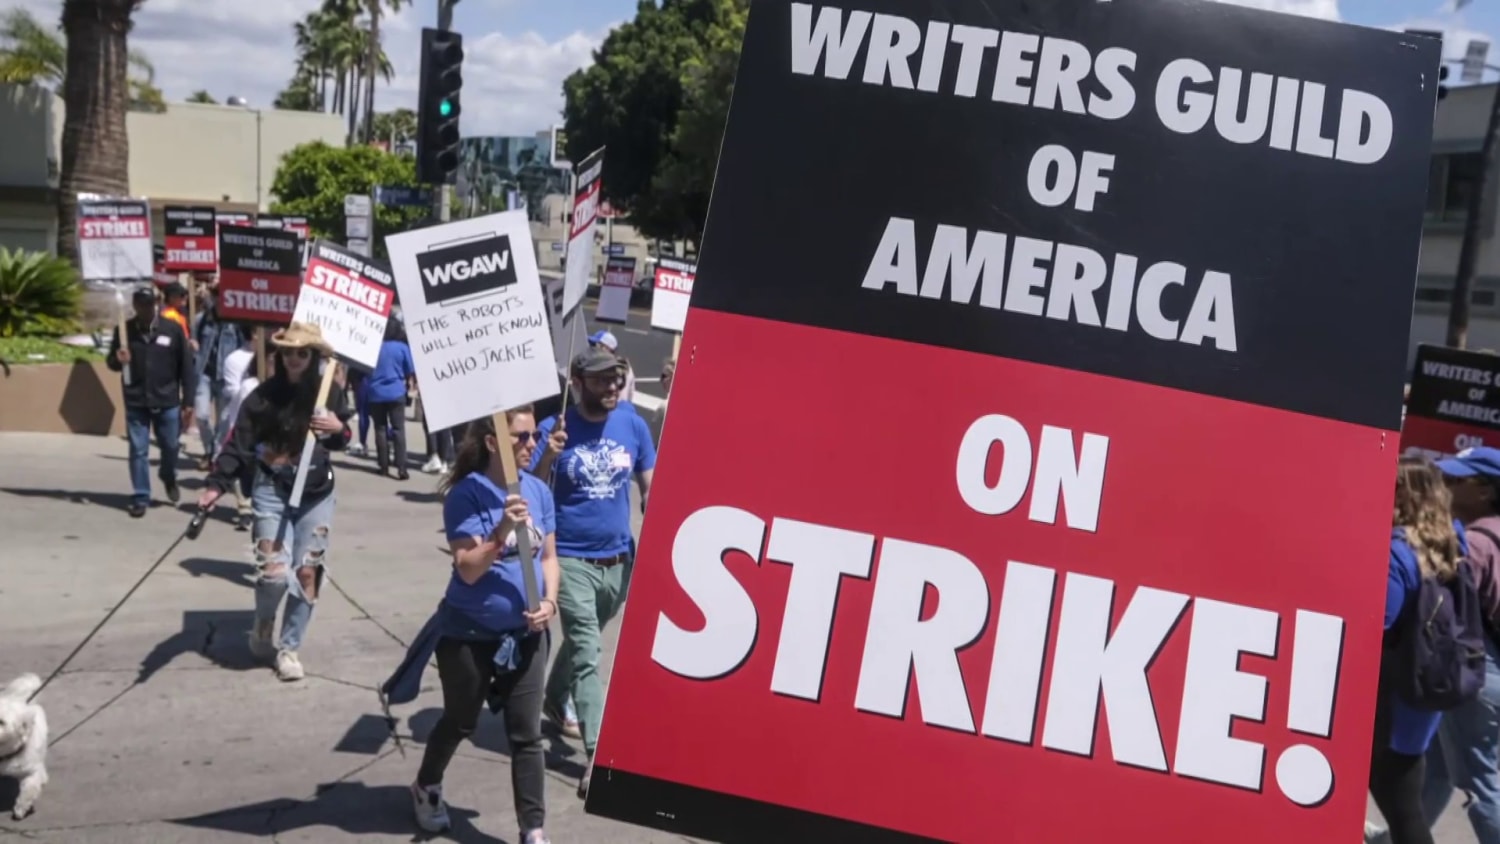 Last Time Hollywood Writers Went on Strike, Landry Killed a Guy